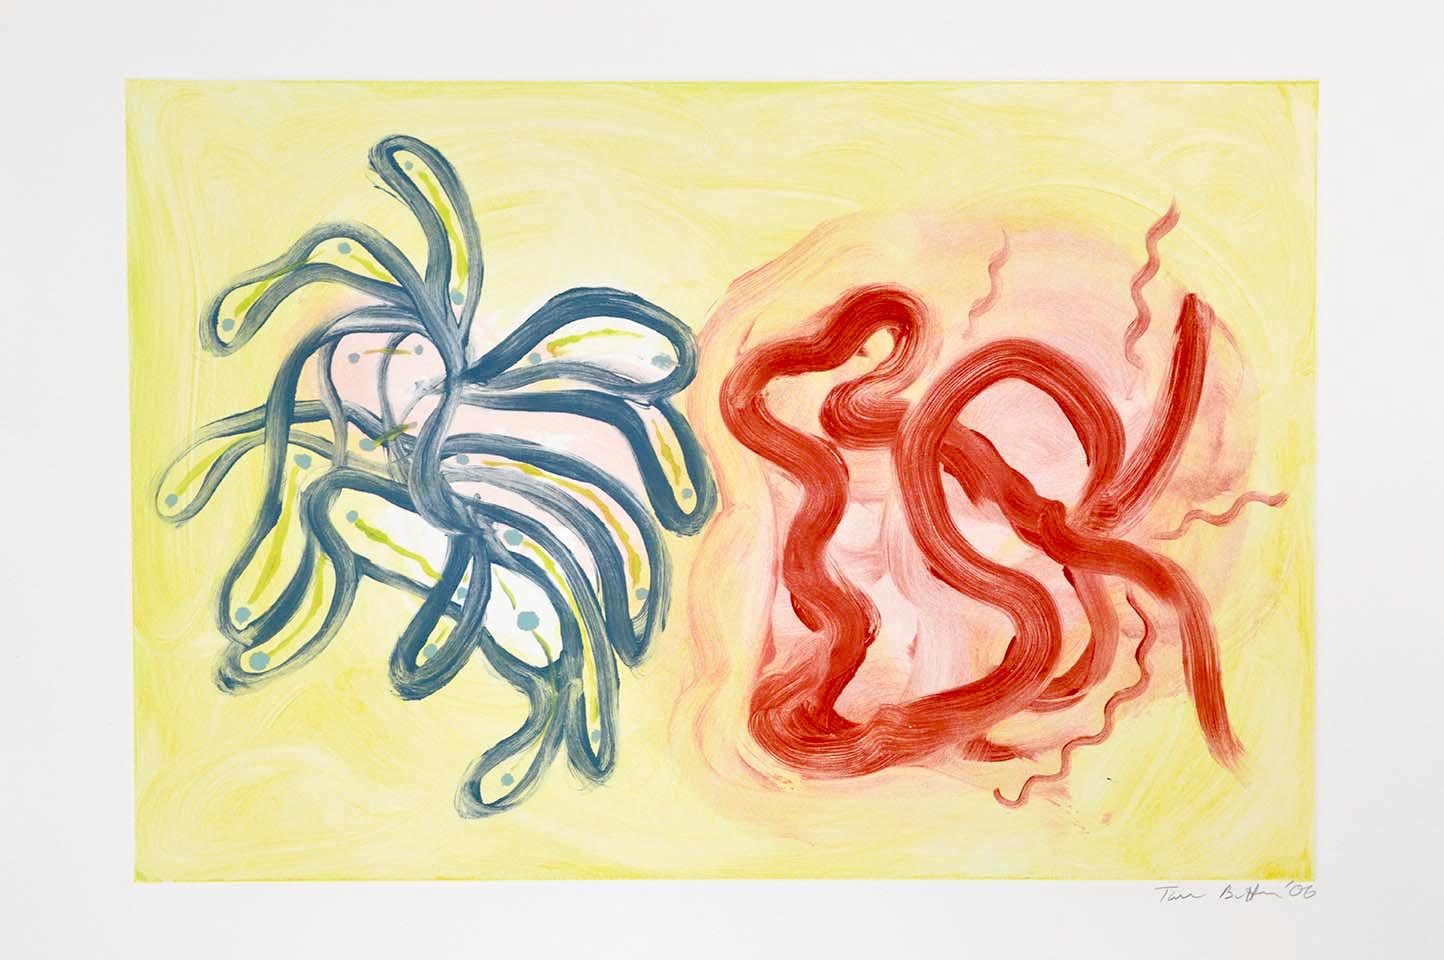  Oil on Arches acid free rag paper, 26 x 30 inches (66 x 76.2 cm), signed and dated 2006 